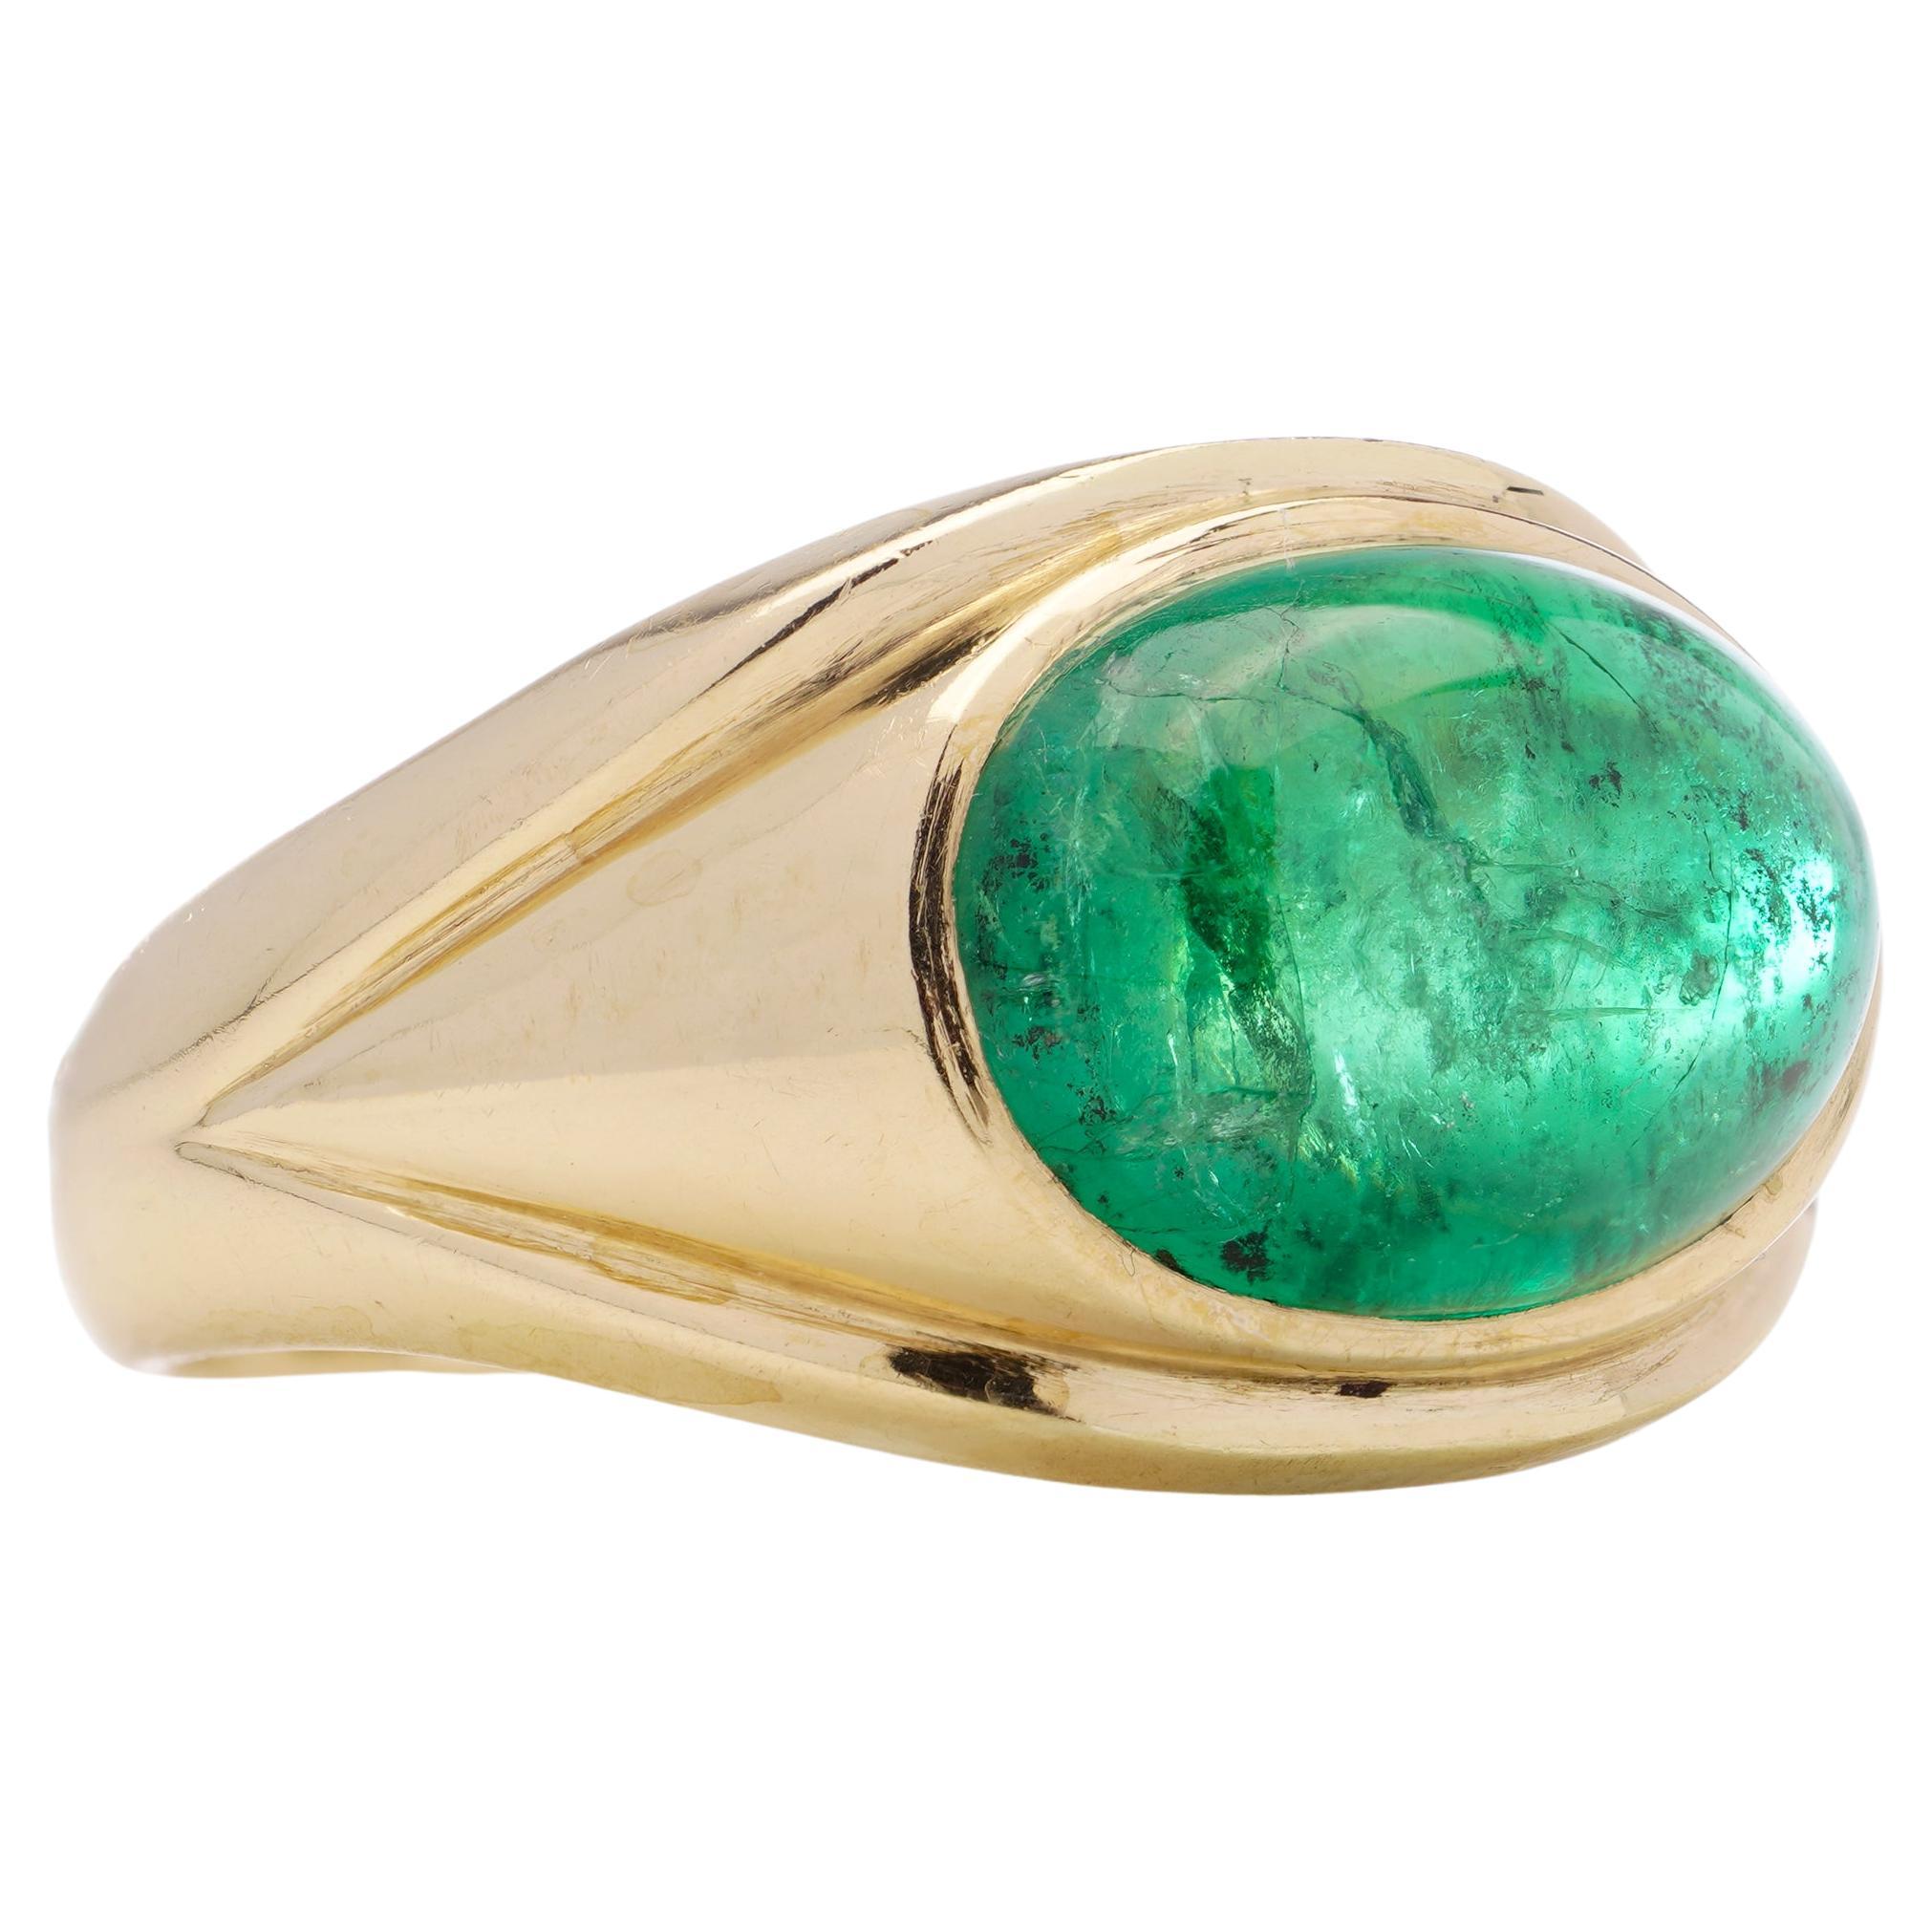 Vintage 18kt yellow gold dome ring set with oval 3.95ct. cabochon Emerald.
Made in the United Kingdom, London, 1969
Maker: W Wilkinson Ltd.
Fully hallmarked ( Partial marks faded but still clear to read )

* Please note: customs and import charges